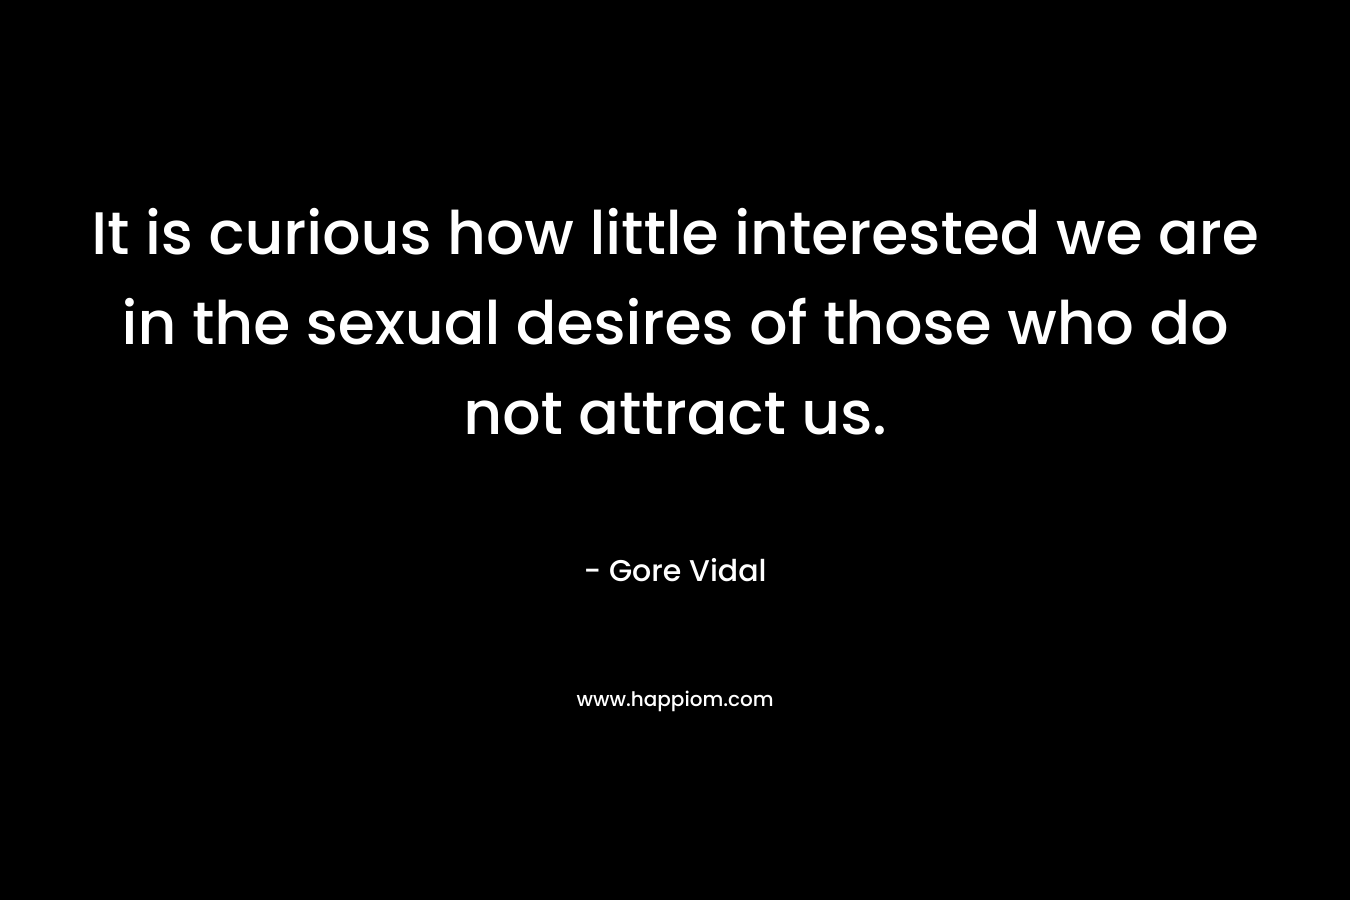 It is curious how little interested we are in the sexual desires of those who do not attract us. – Gore Vidal